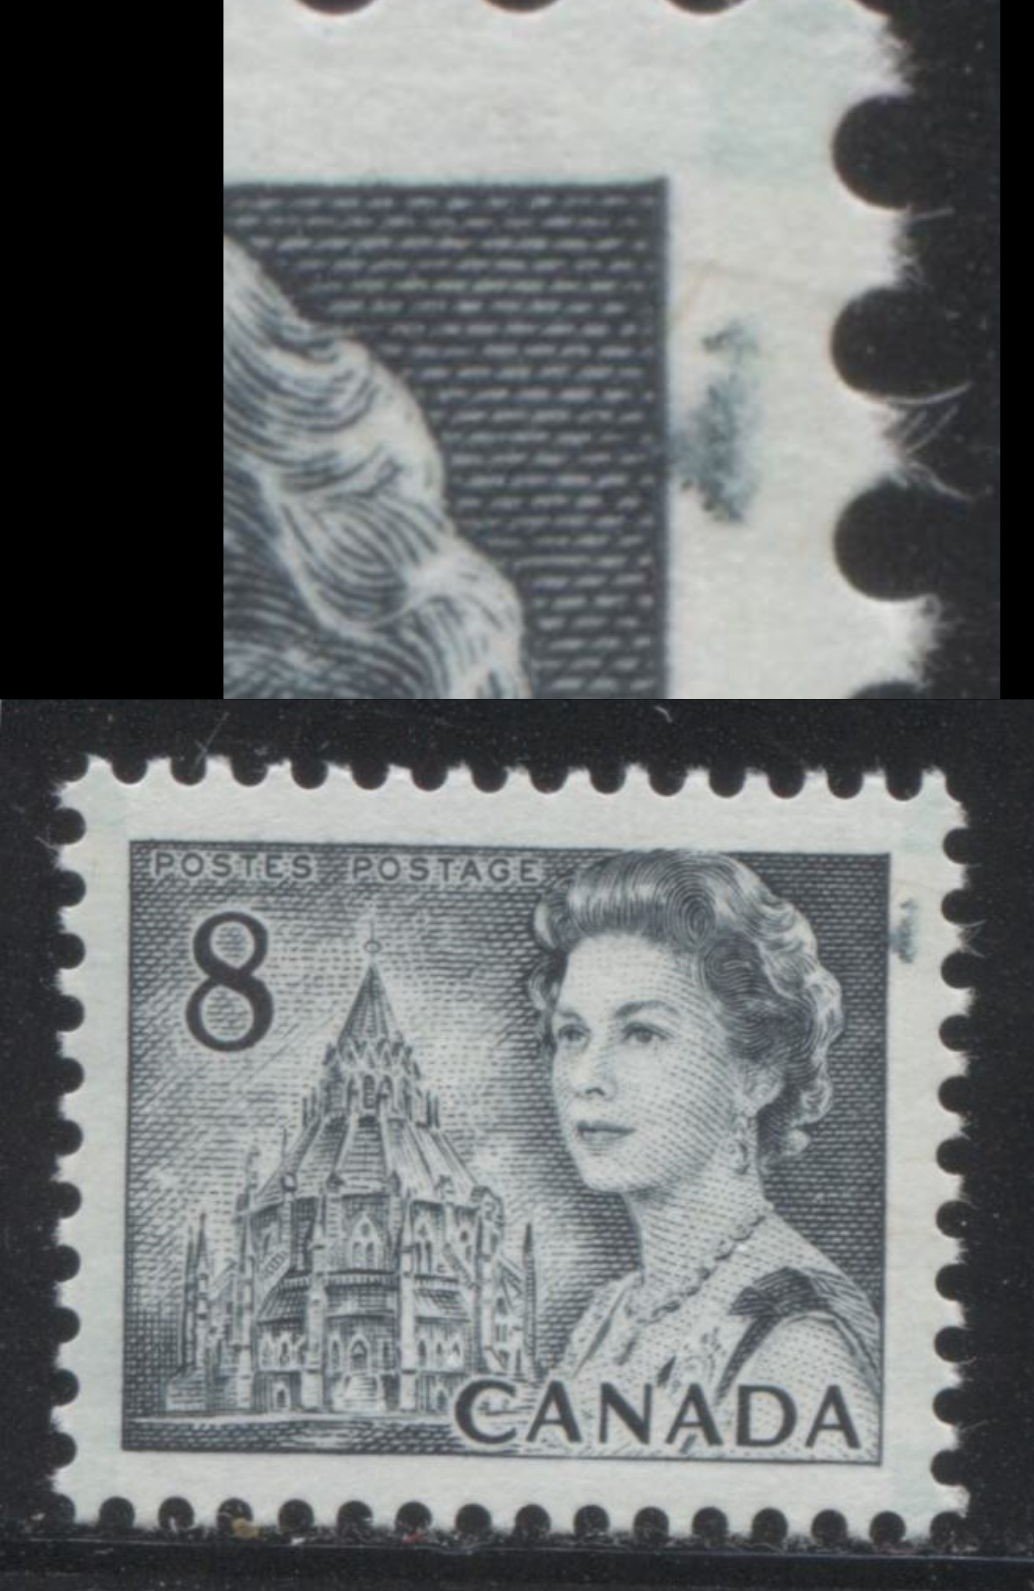 Lot 244 Canada #544pv 8c Slate Queen Elizabeth II, 1967-1973 Centennial Issue, An Unlisted VFNH GT2 Tagged Single On LF-fl Paper With PVA Gum, Smudge in Right Margin At UR